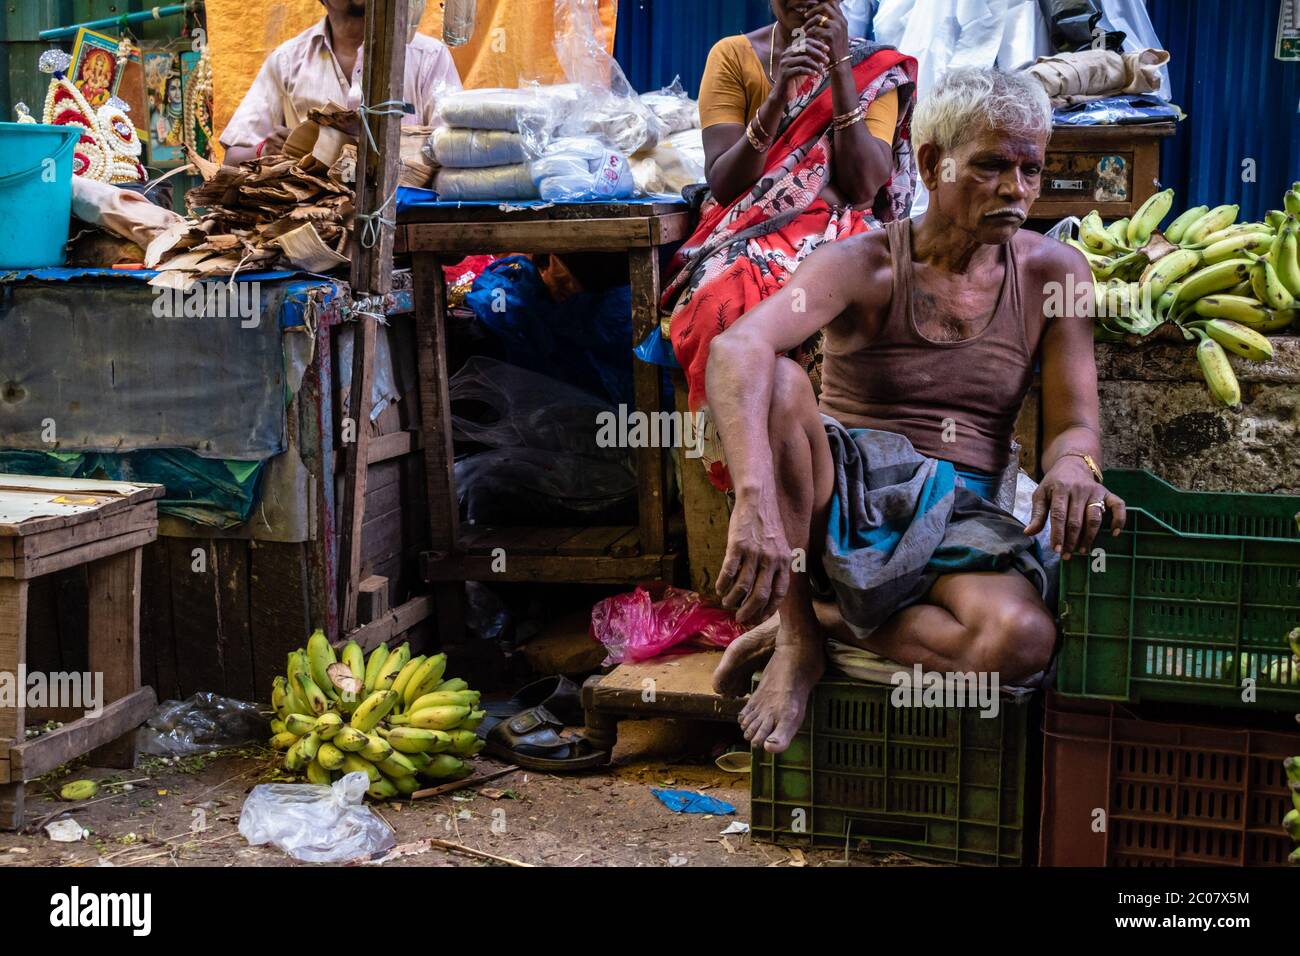 Chennai, Tamil Nadu, India - August 2018: An elderly Indian man sitting in a market wearing an undershirt and staring thoughtfully. Stock Photo